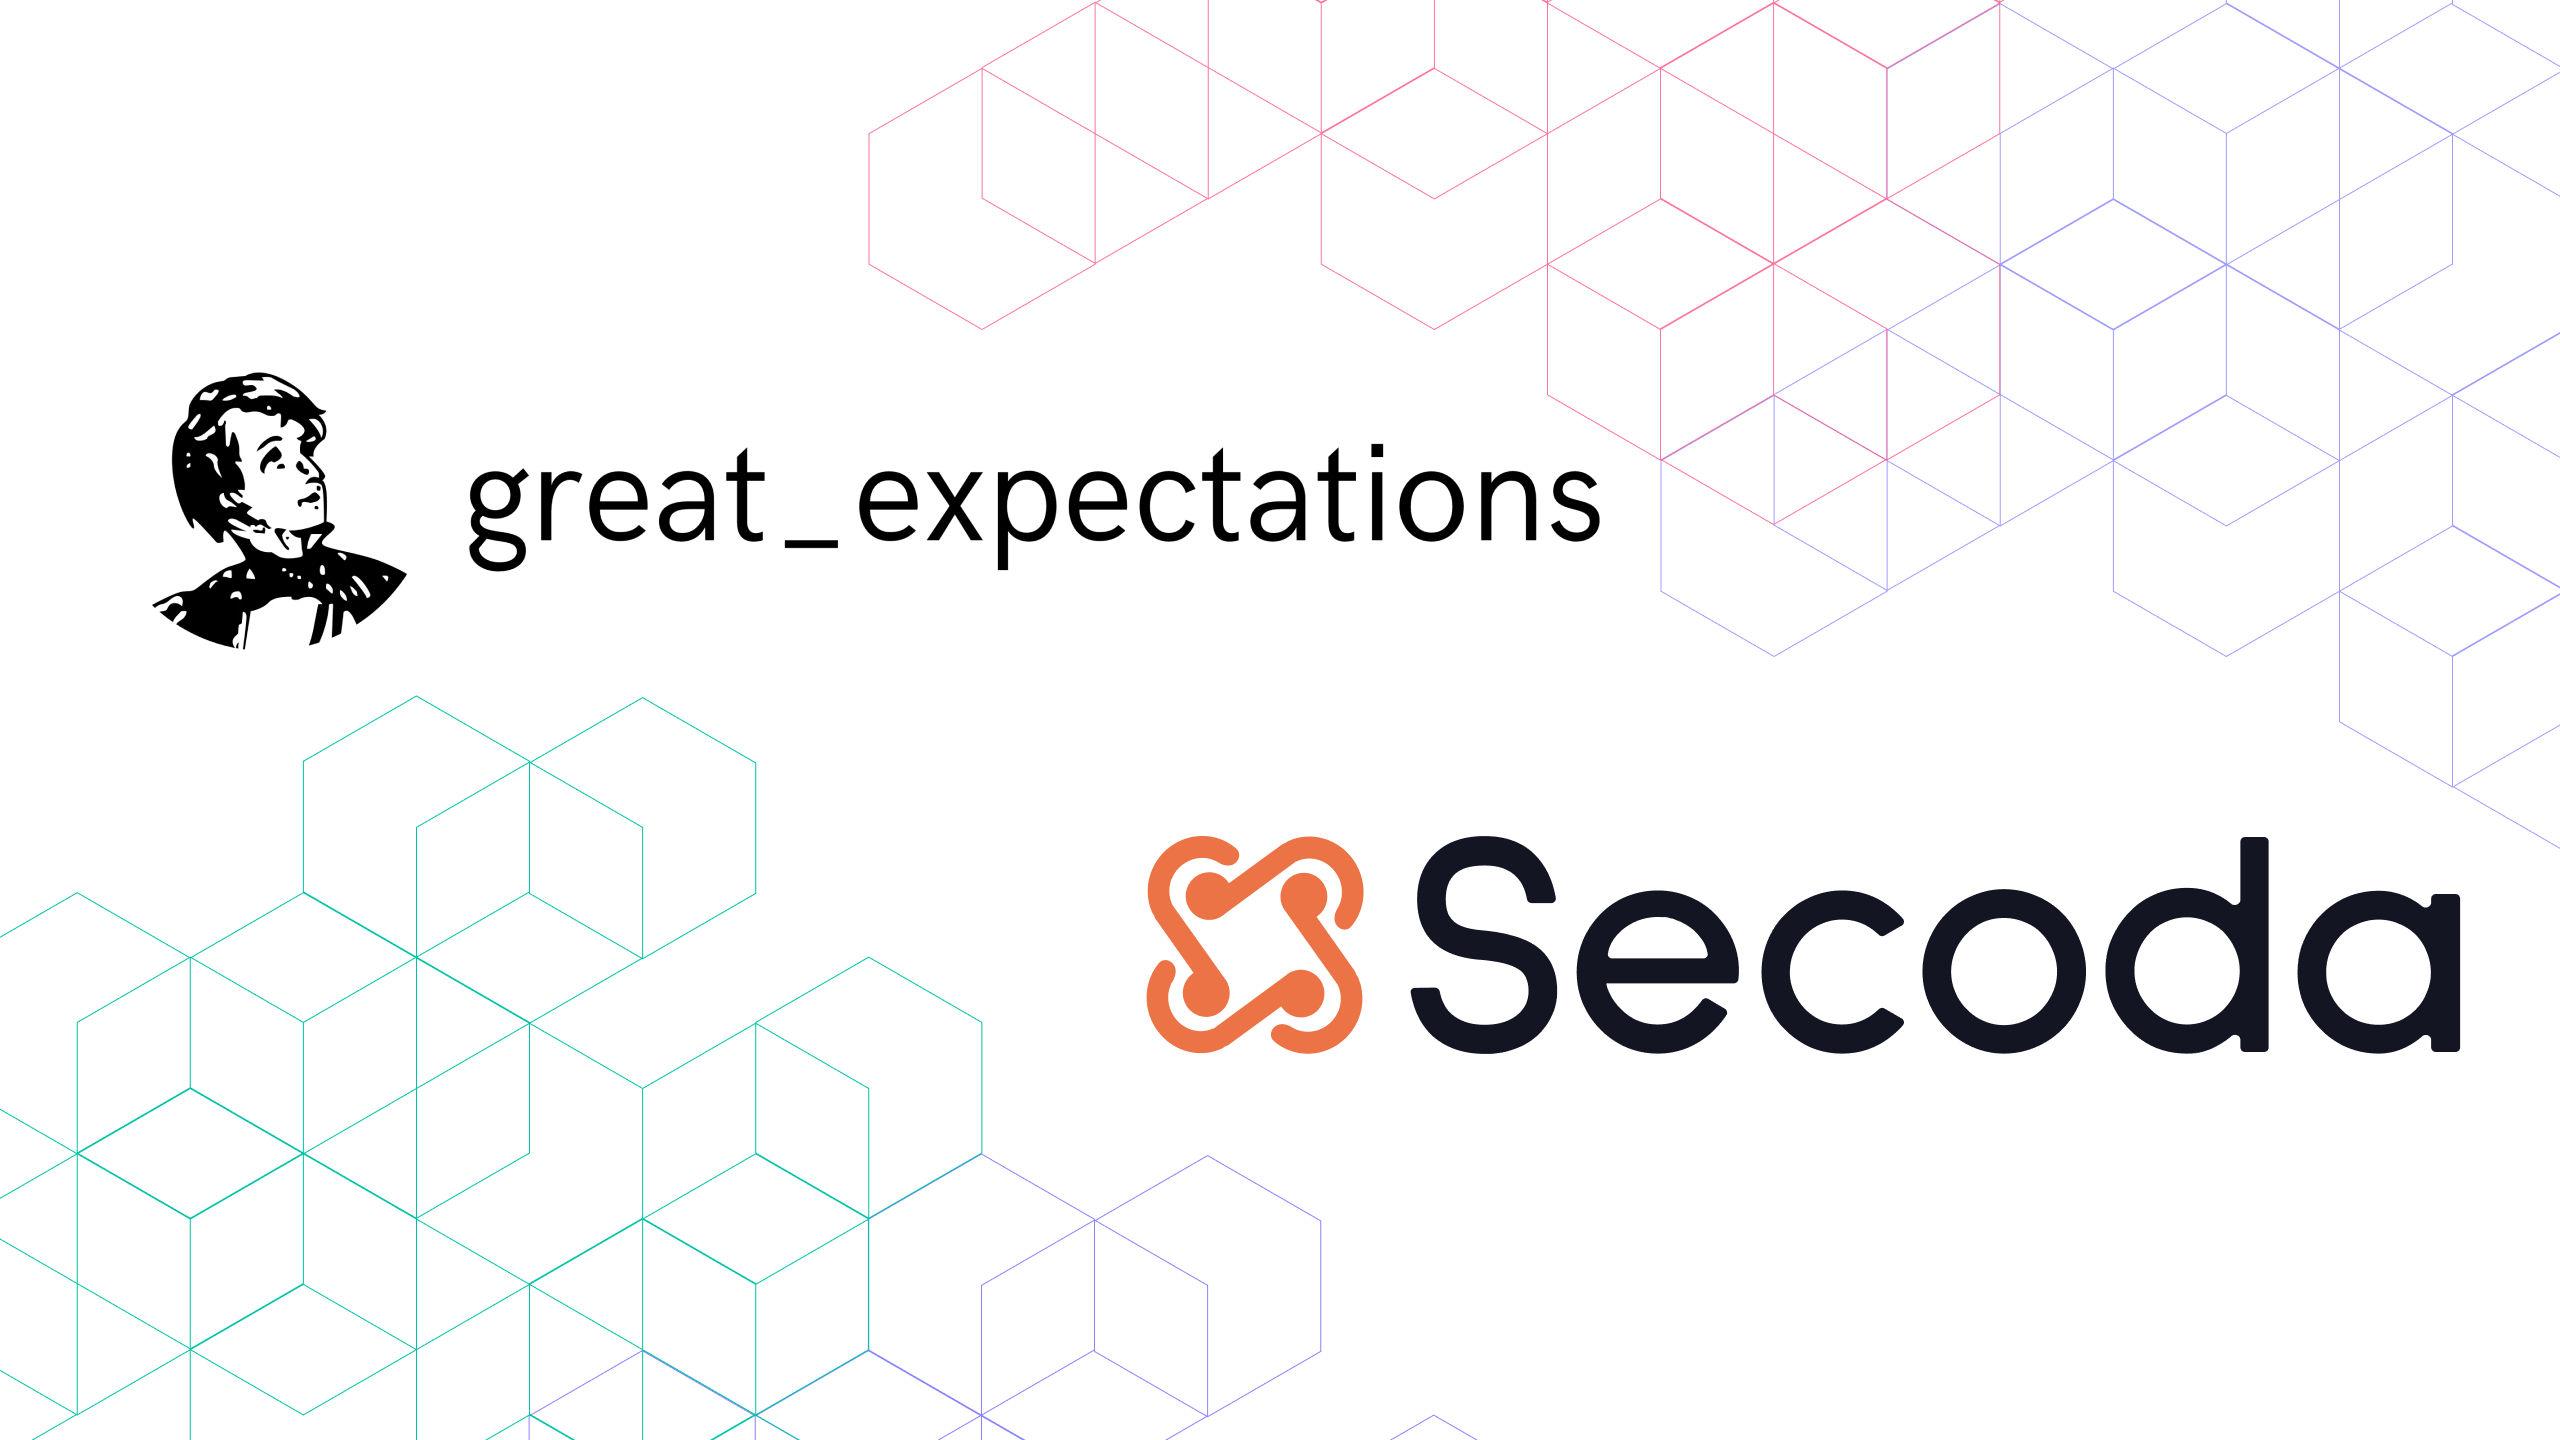 Great Expectations and Secoda logos together